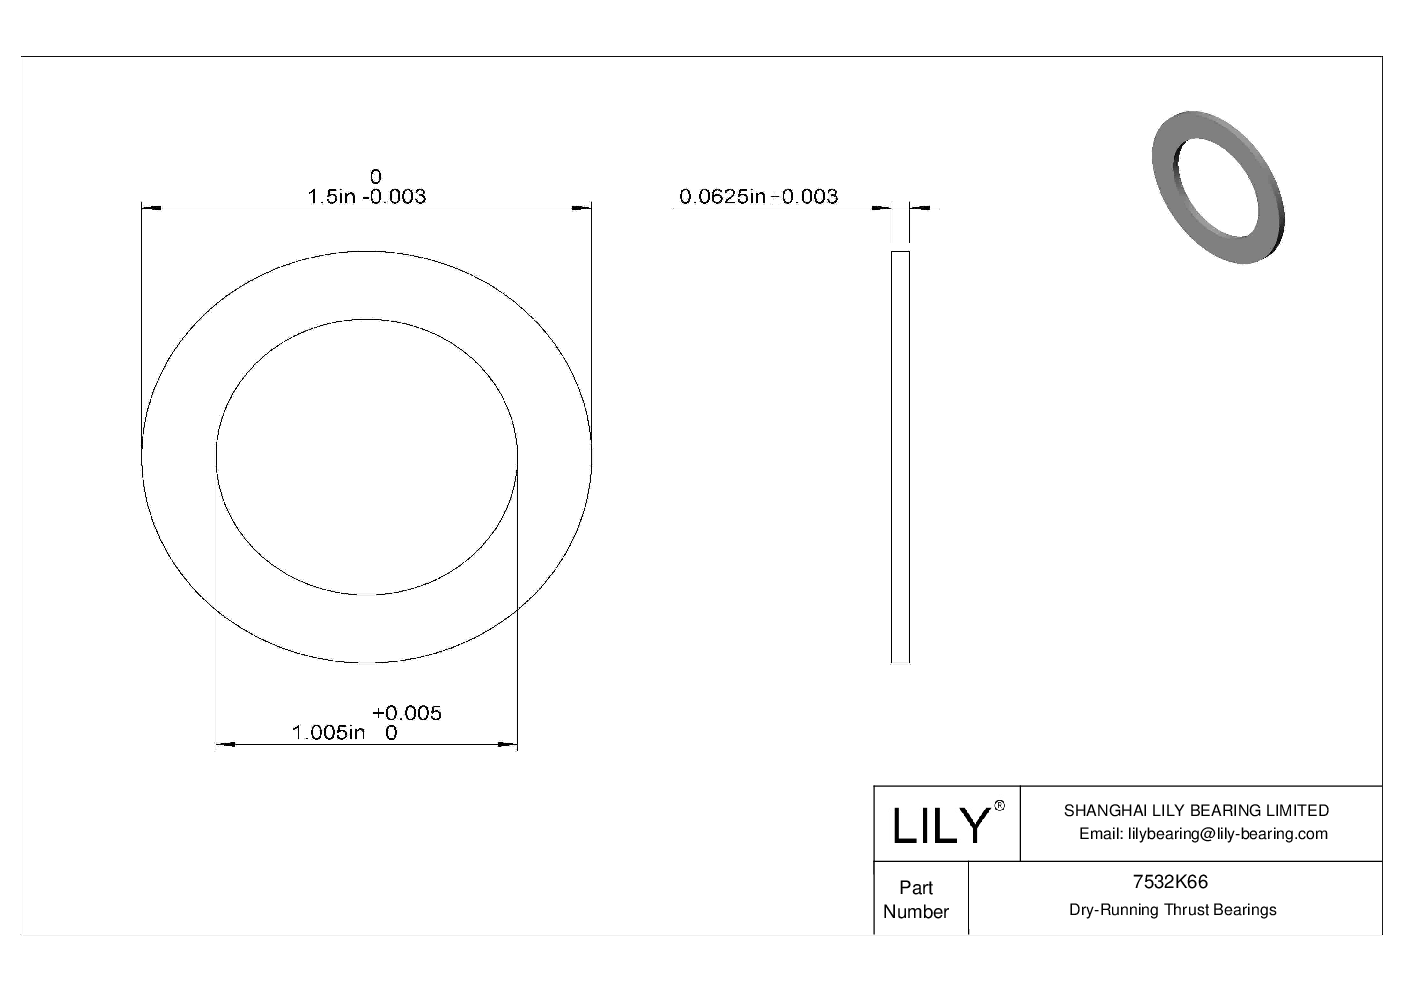 HFDCKGG Water-Resistant Dry-Running Thrust Bearings cad drawing